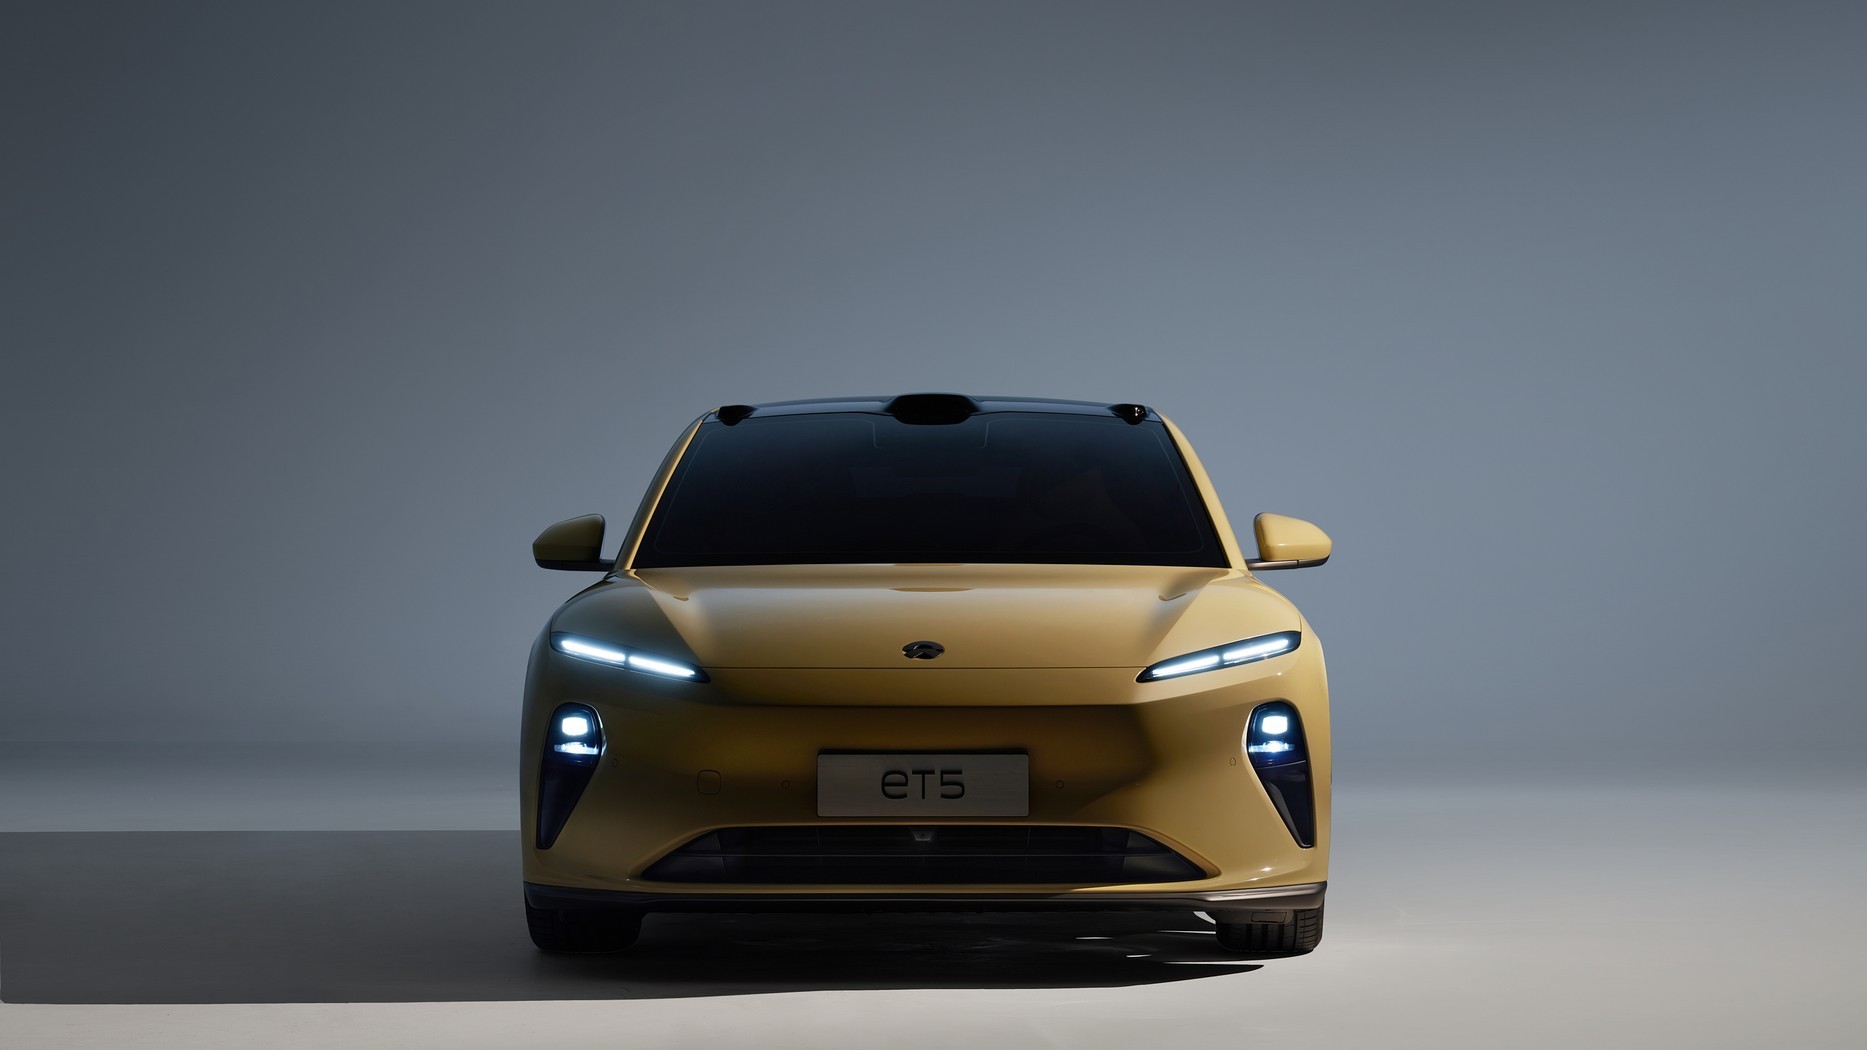 NIO ET5 1 - Here's Everything We Know About The NIO ET5, Tesla Model 3 major competitor